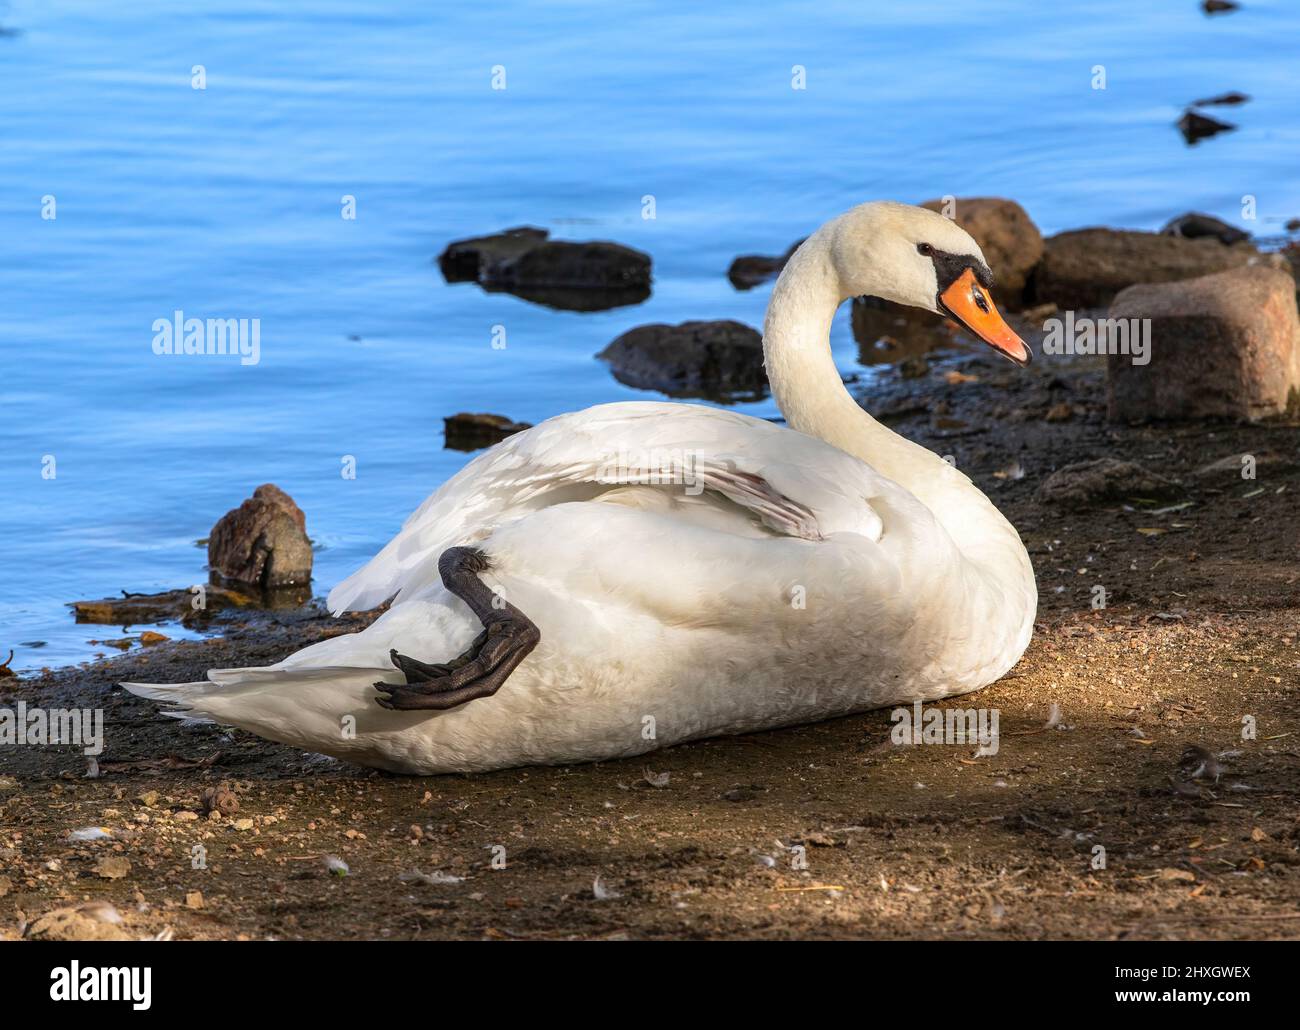 A Mute Swan resting by the side of a lake in dappled sunlight with a slightly extended foot and leg visible. Stock Photo